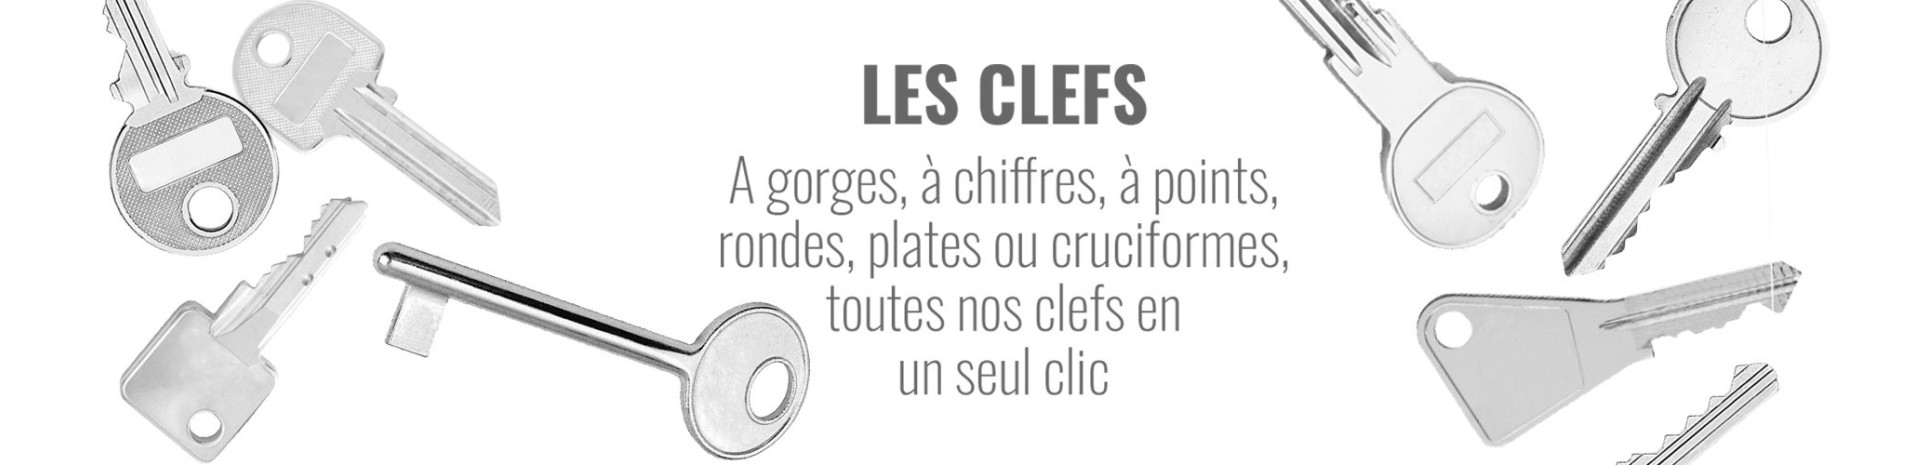 CLES 